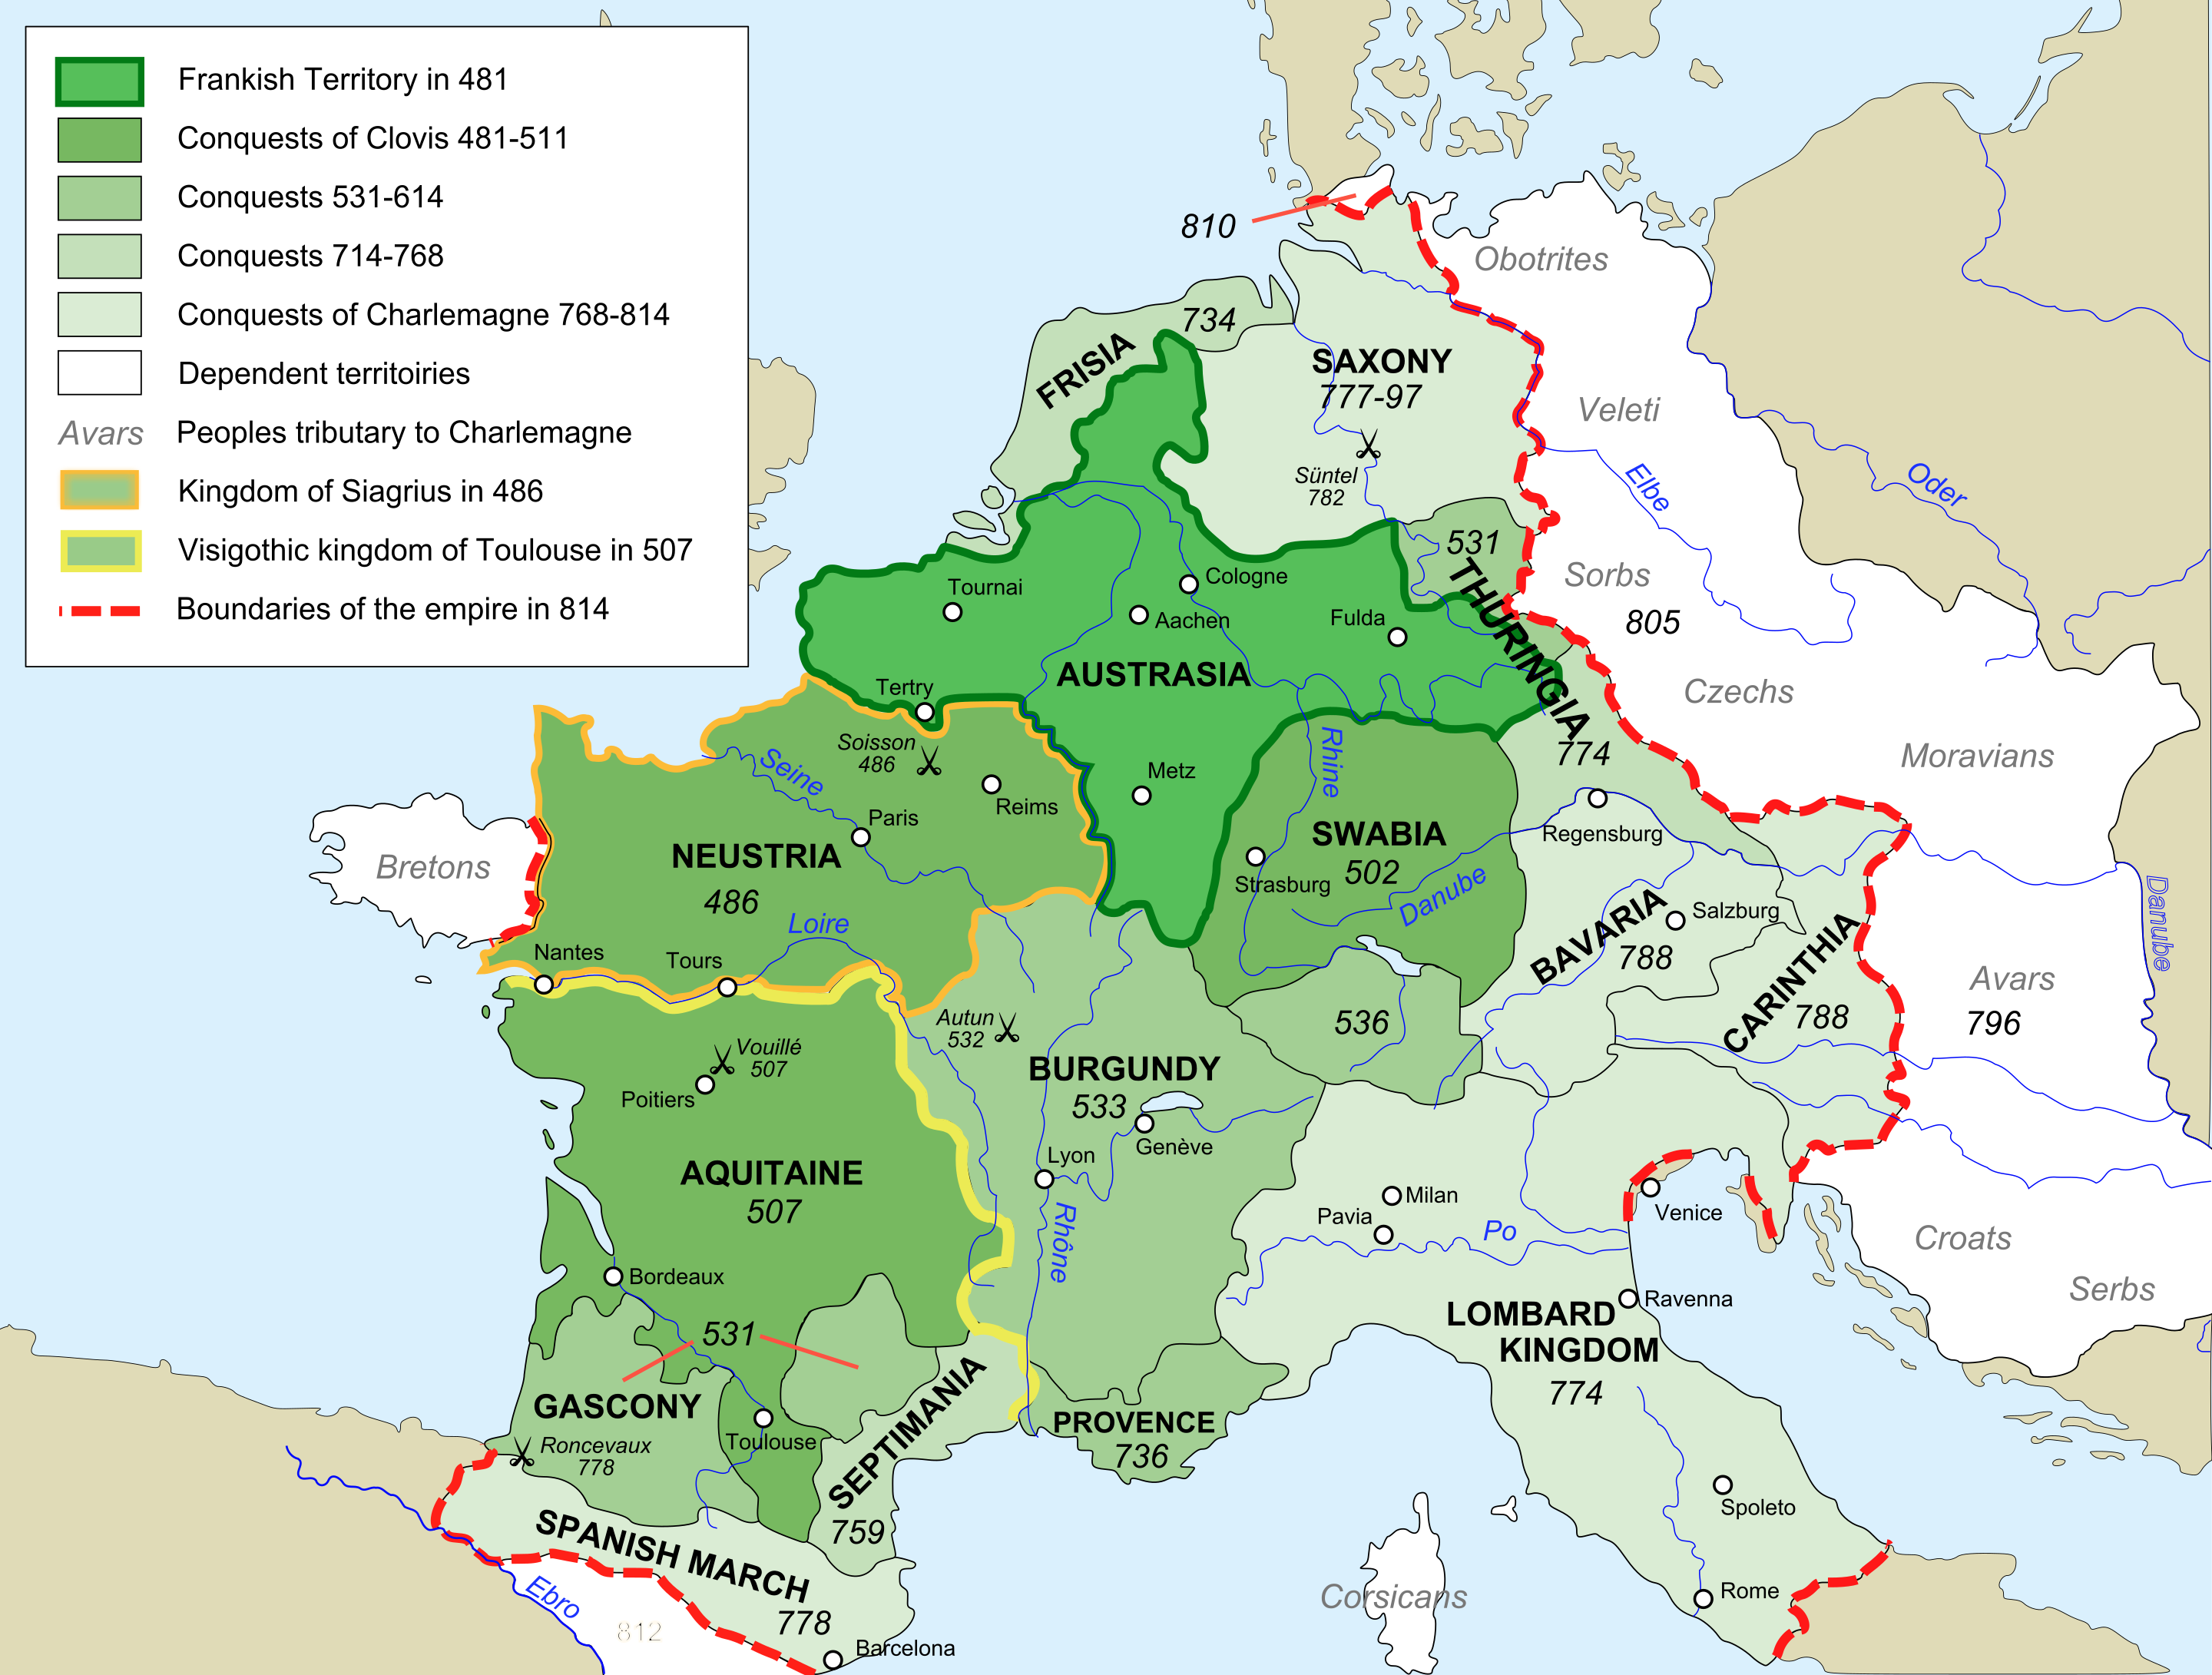 2880px-Frankish_Empire_481_to_814-en.svg.png